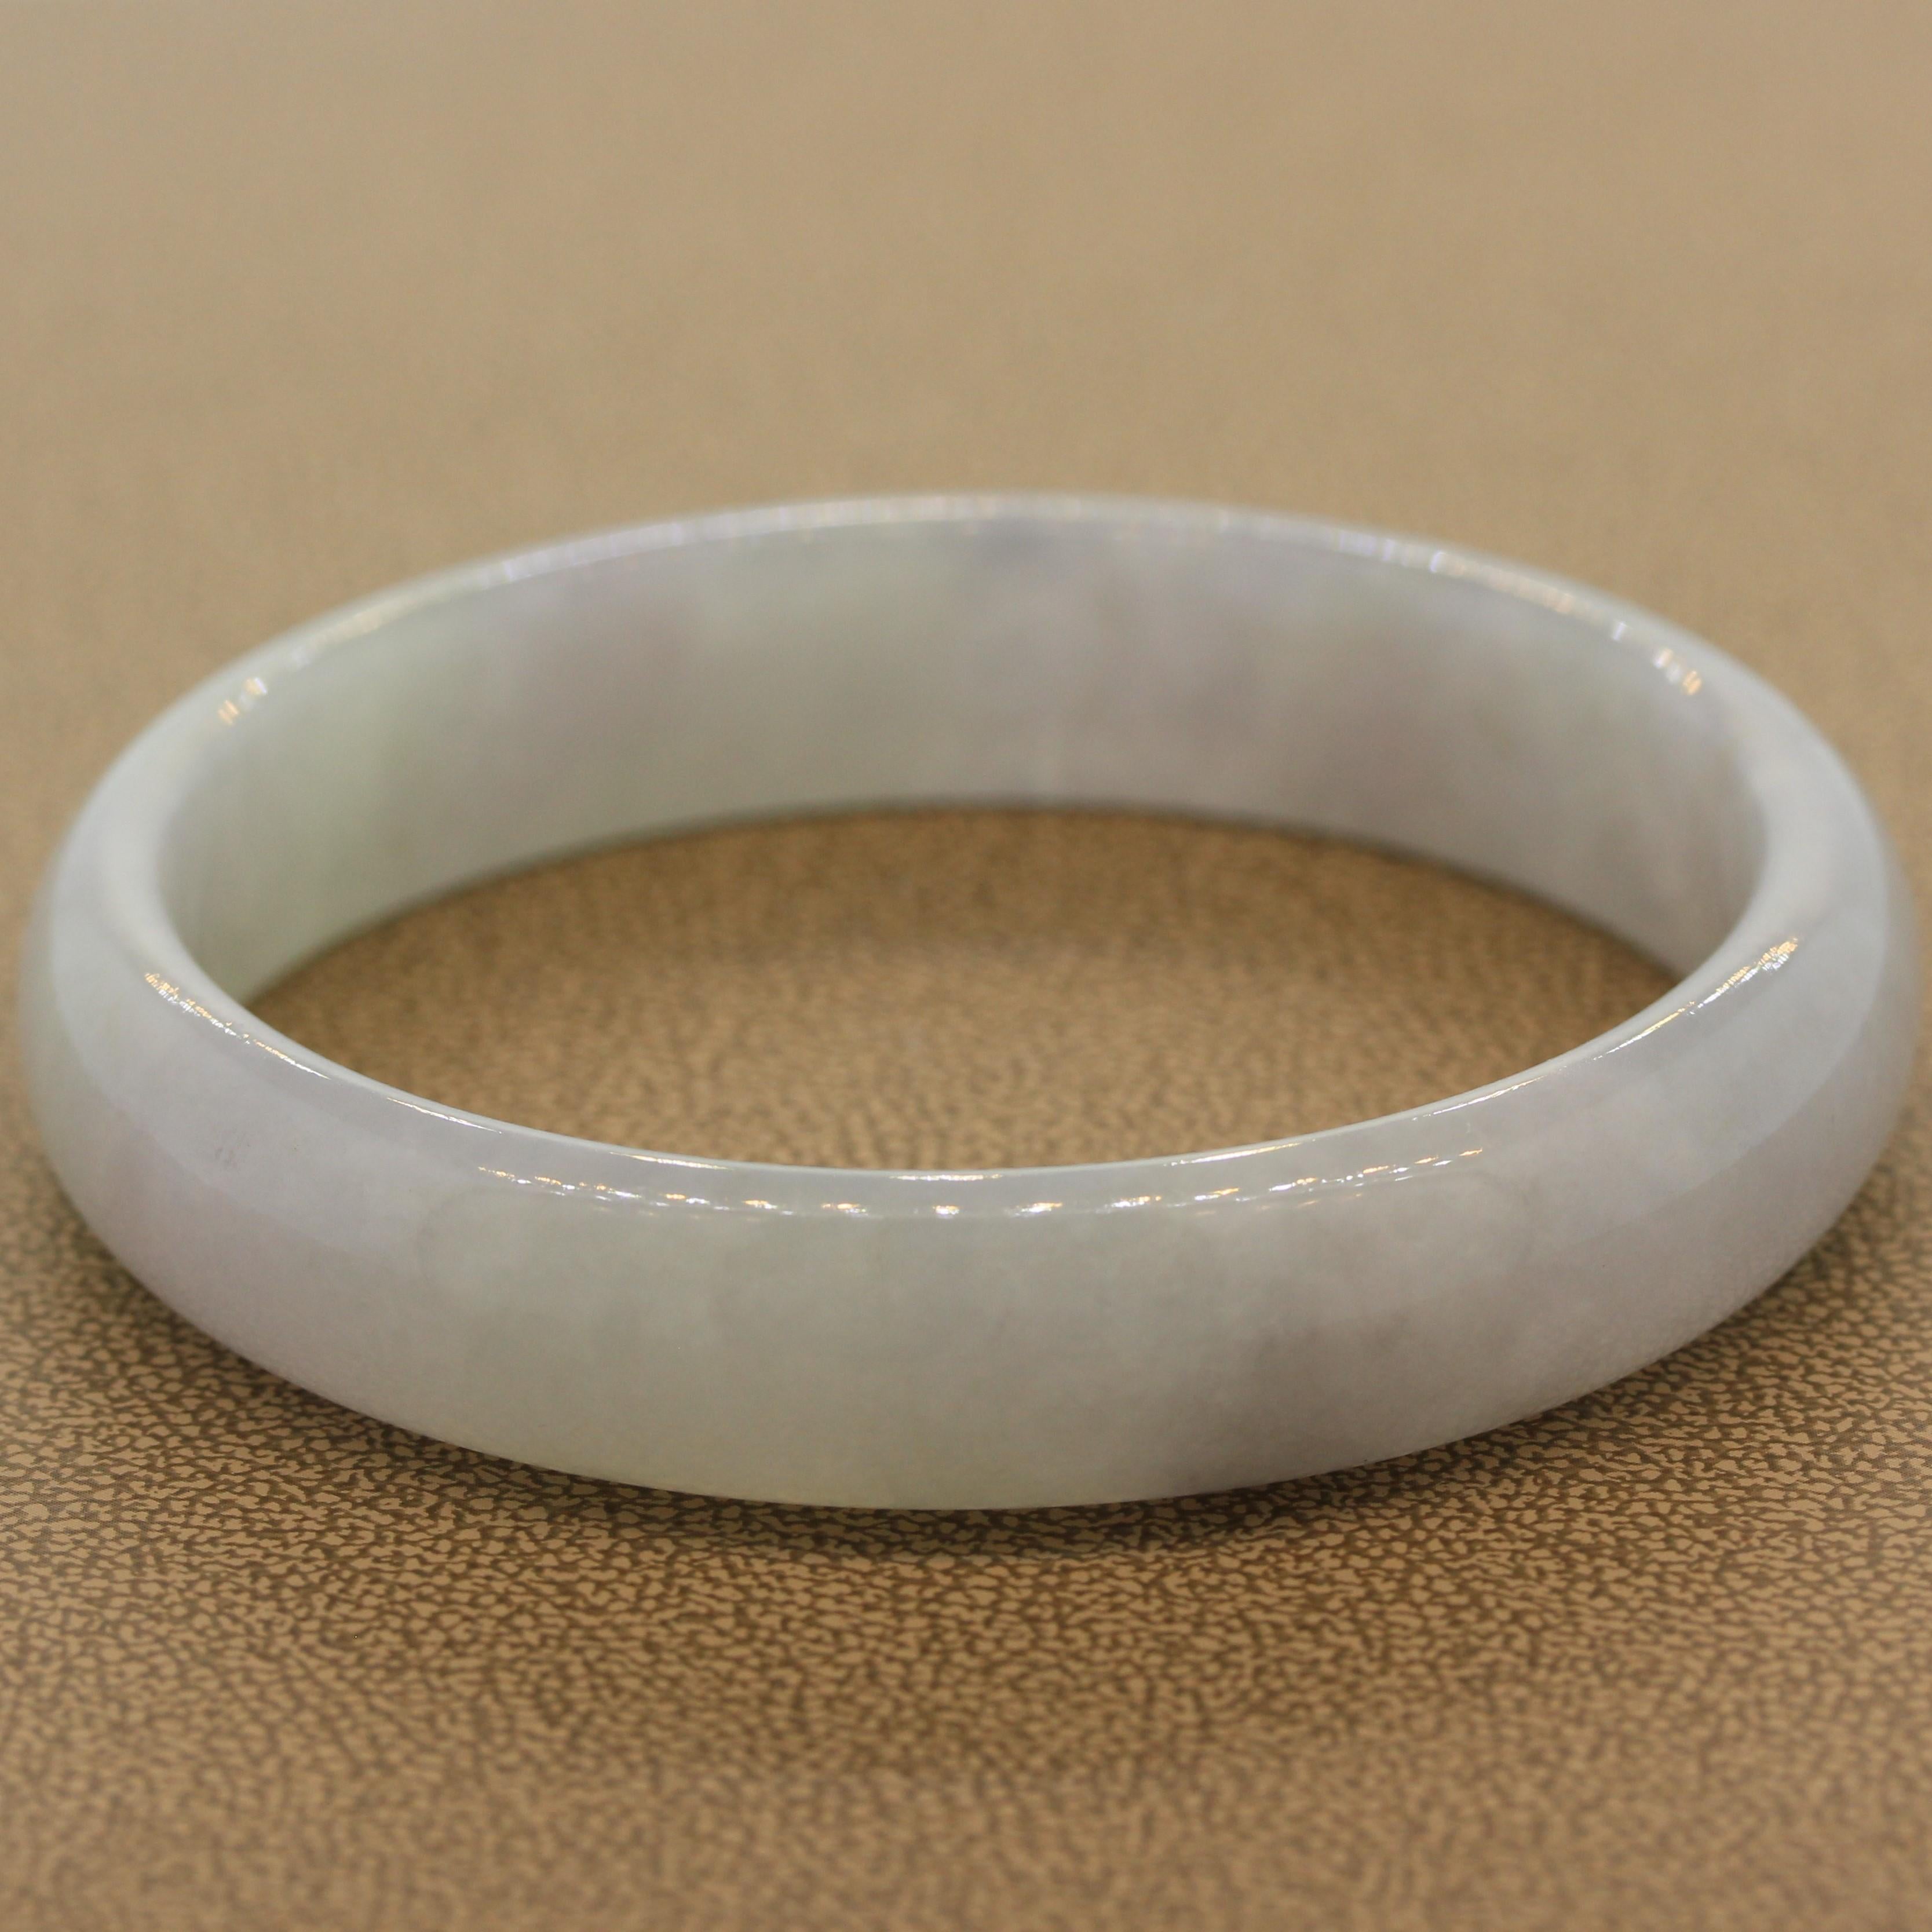 A lovely jadeite jade bangle with a soft lavender color. The luster and polish of the bangle are evident in the bright shine that comes off the bangle as the light hit it. A symbol of good luck it is said jade bring the holder food fortune.

Size 6